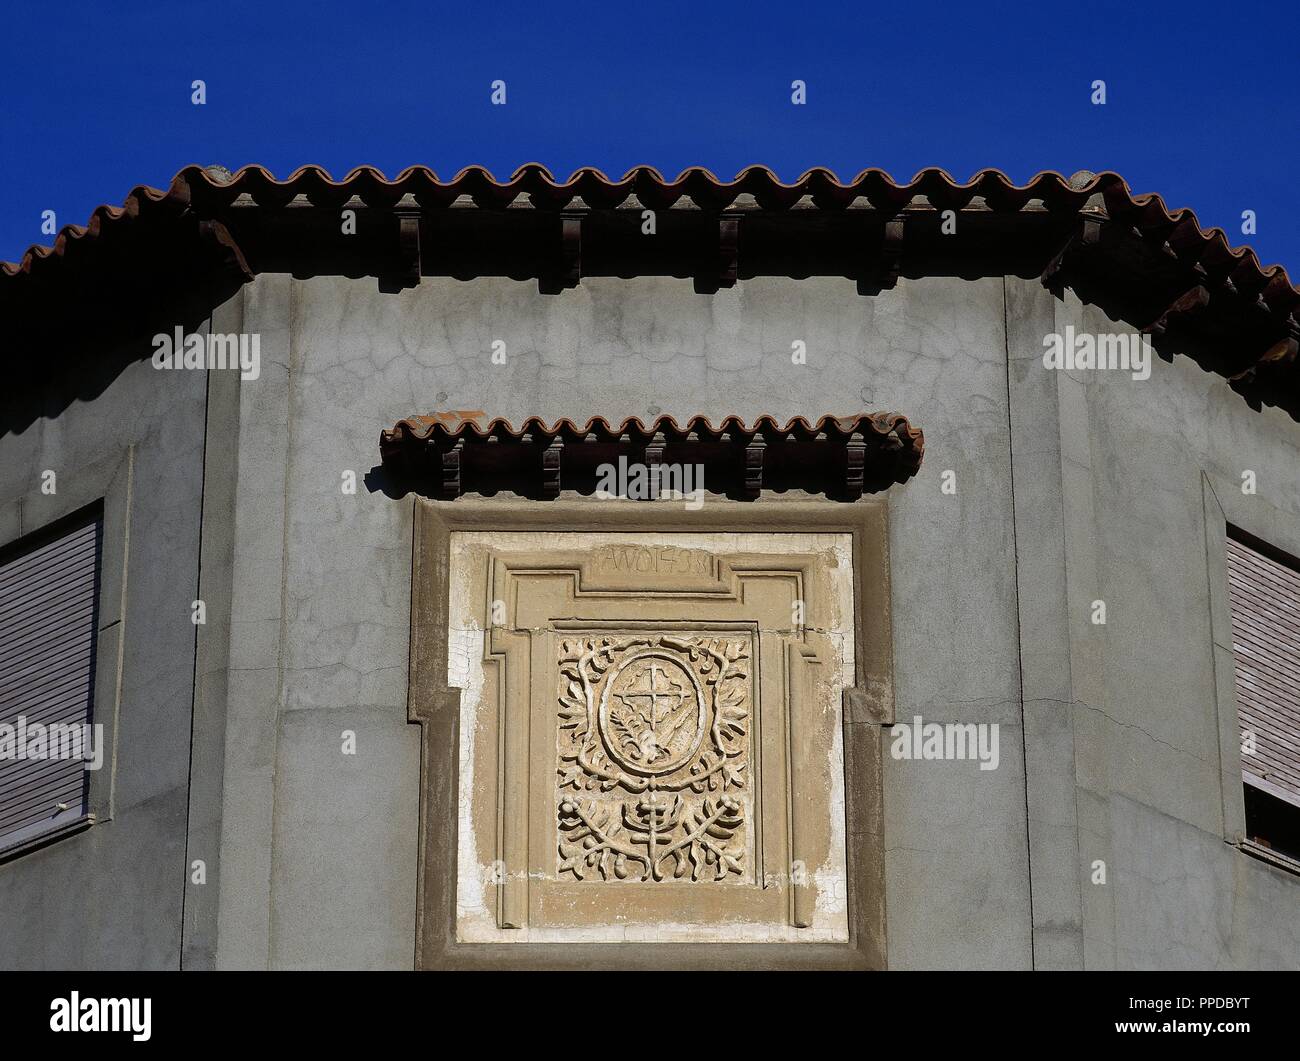 Coat of arms of the Inquisition. Remains of the facade of the House of the Inquisition, detail. It was built in 1438. Mota del Cuervo. Cuenca province, Castile-La Mancha, Spain. Stock Photo